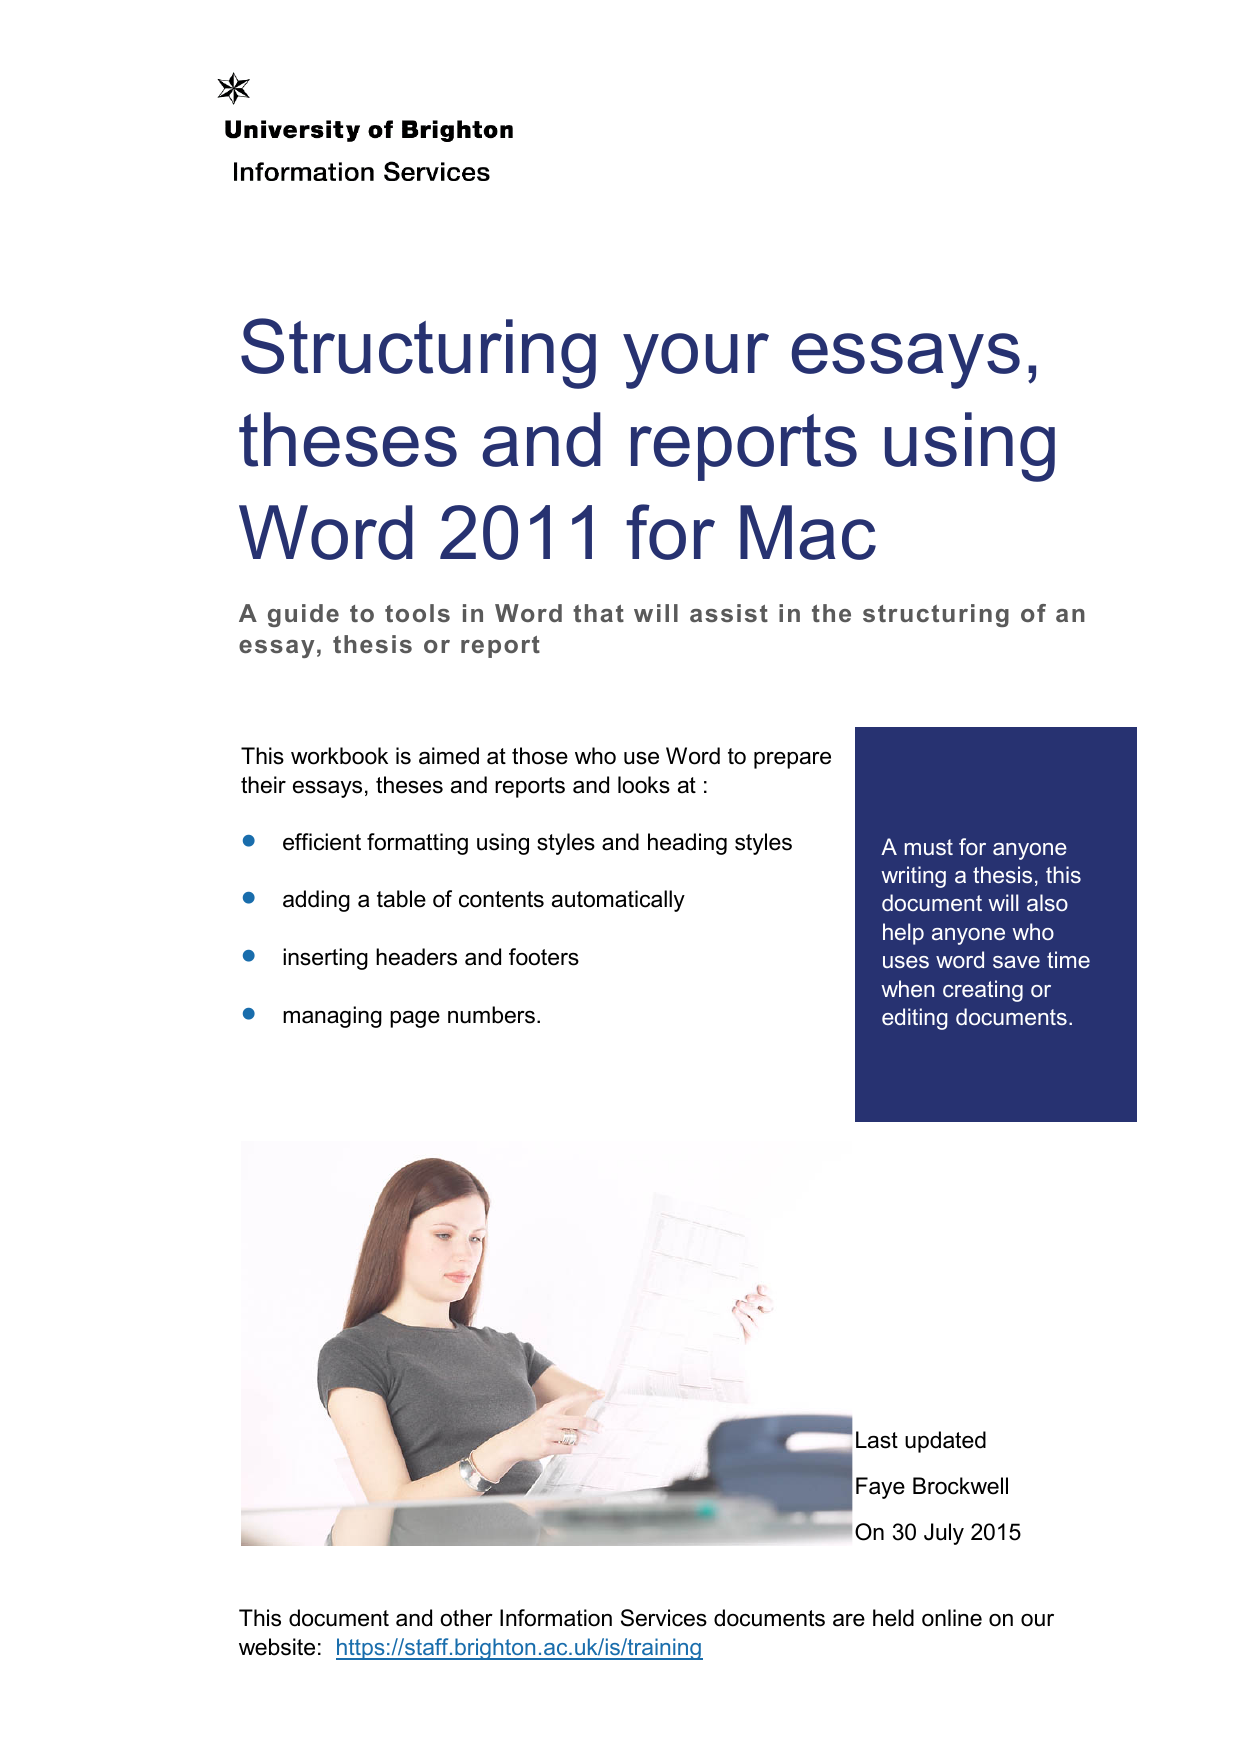 word mac 2011 separate footer for each page